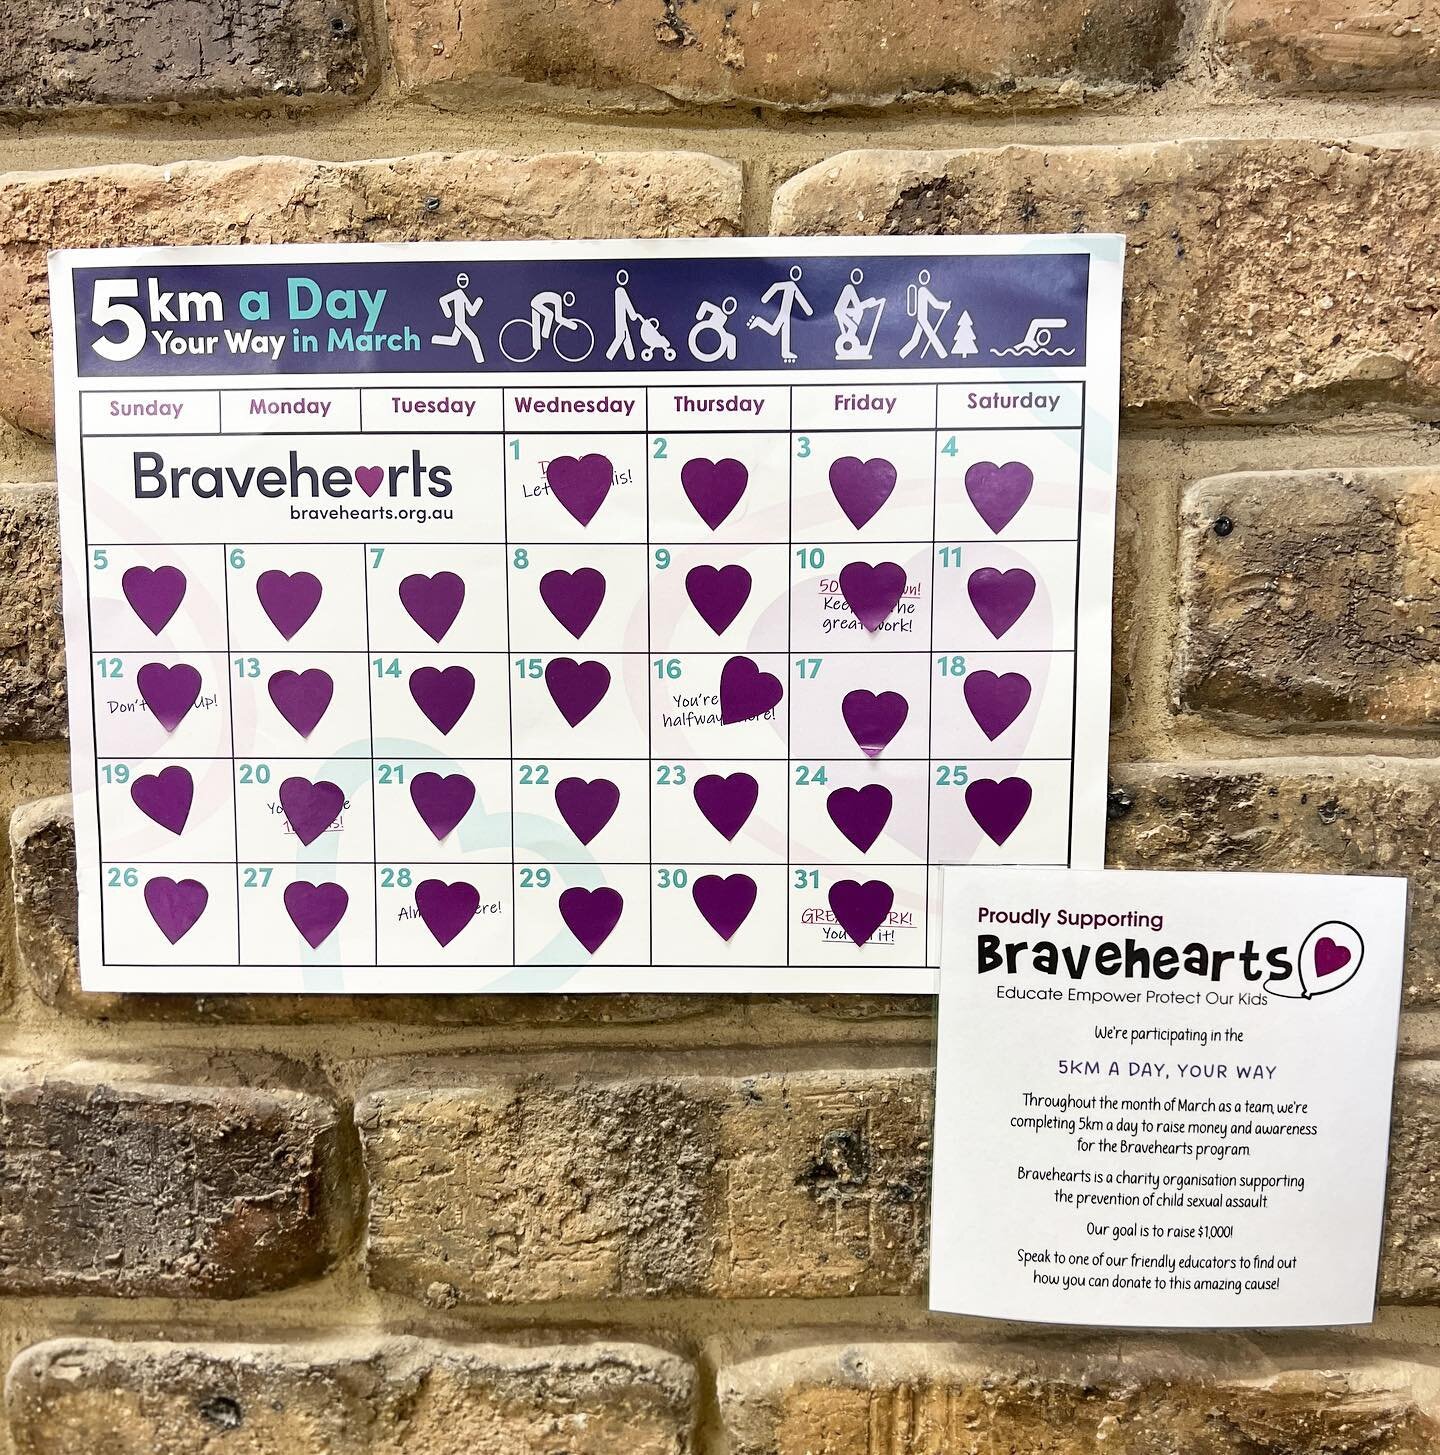 A very big congratulations to the team at O&rsquo;Briens Montessori Centre for successfully completing the &lsquo;5km a day, your way&rsquo; throughout the month of March to raise money and awareness for @braveheartsprotectkids 💜

We raised a total 